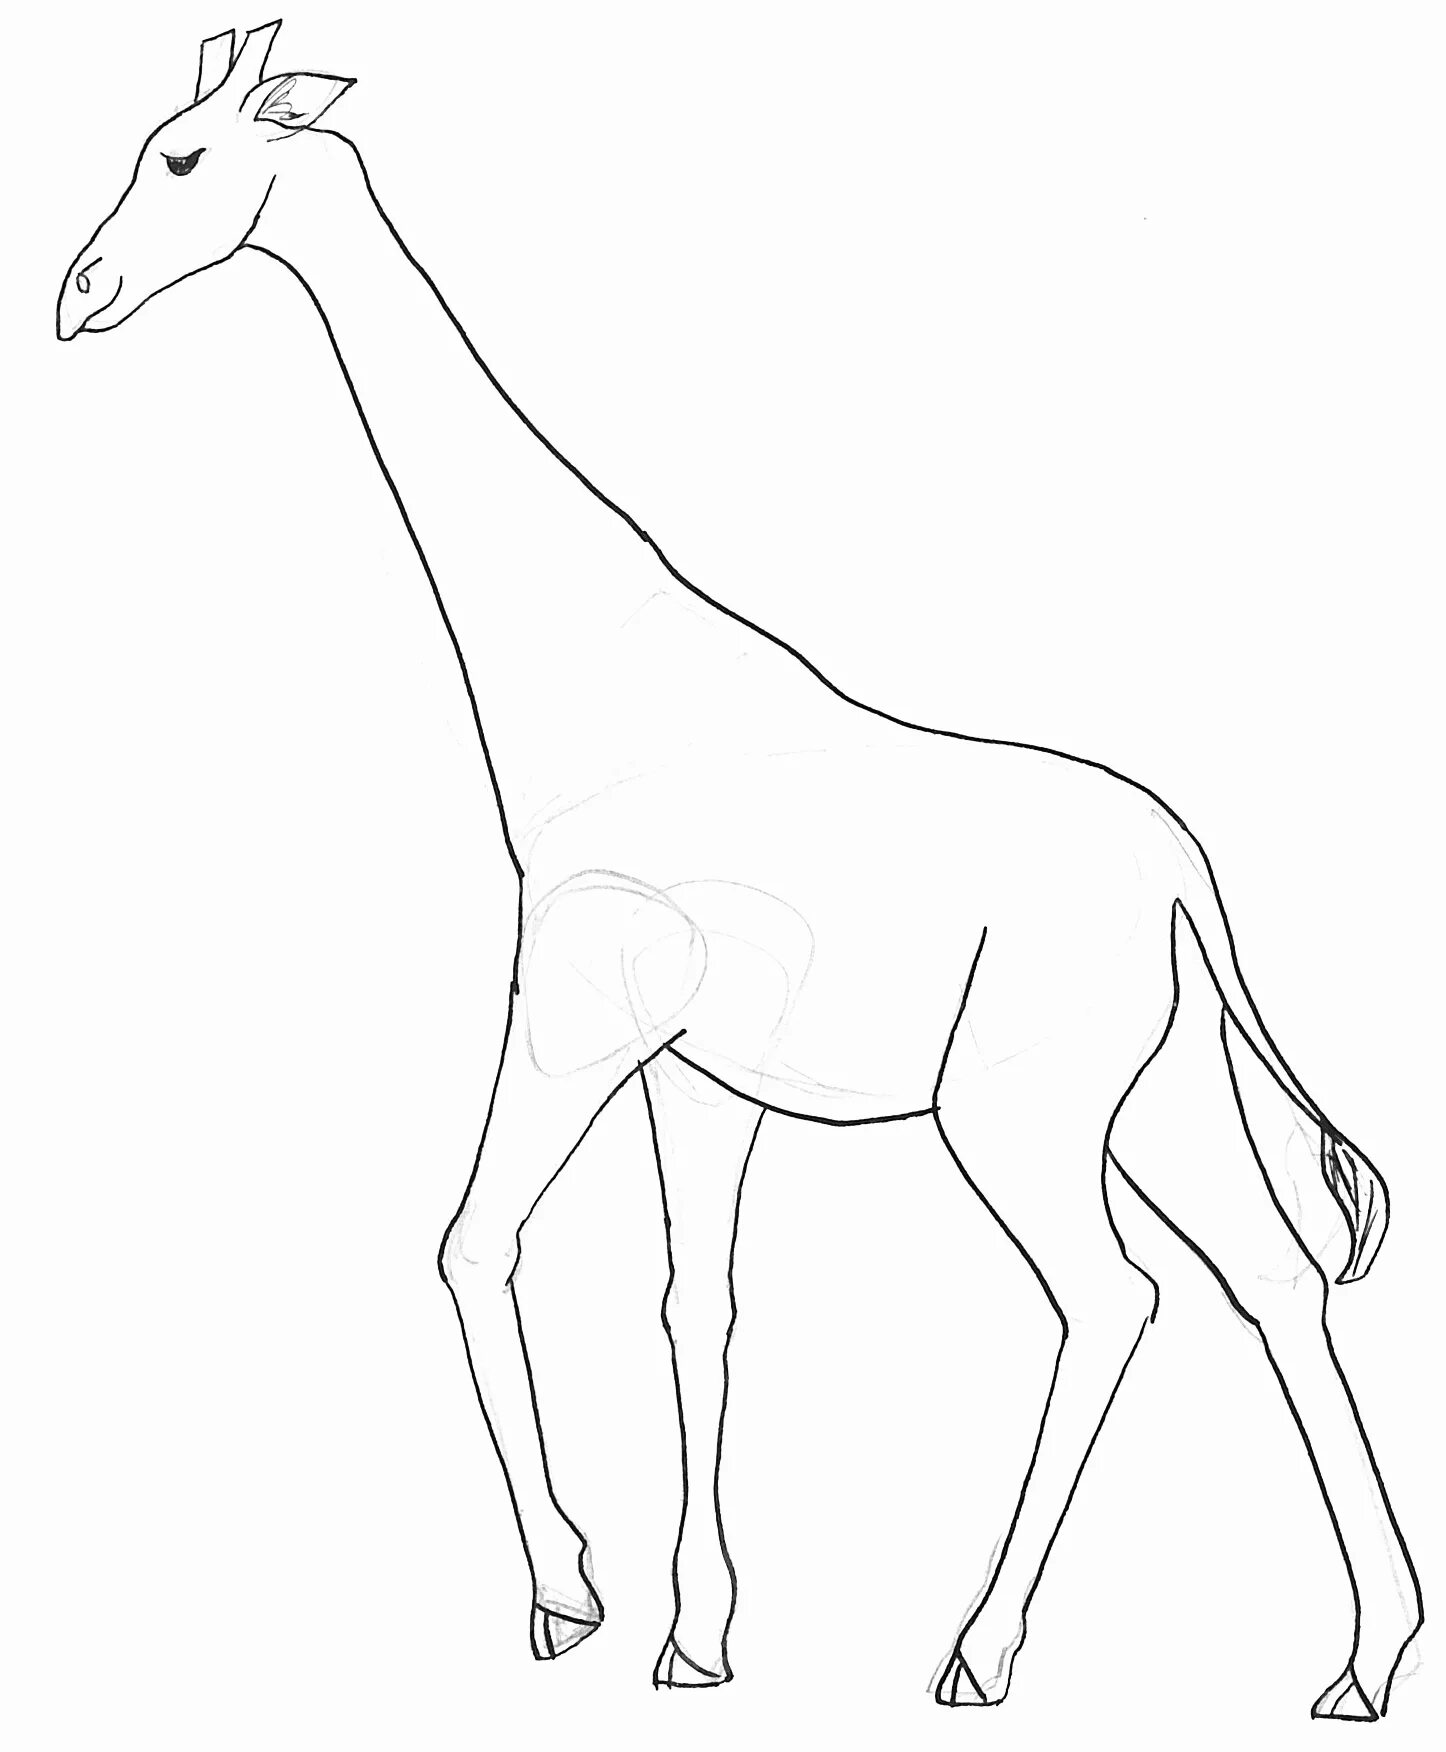 Giraffe without spots for kids #4